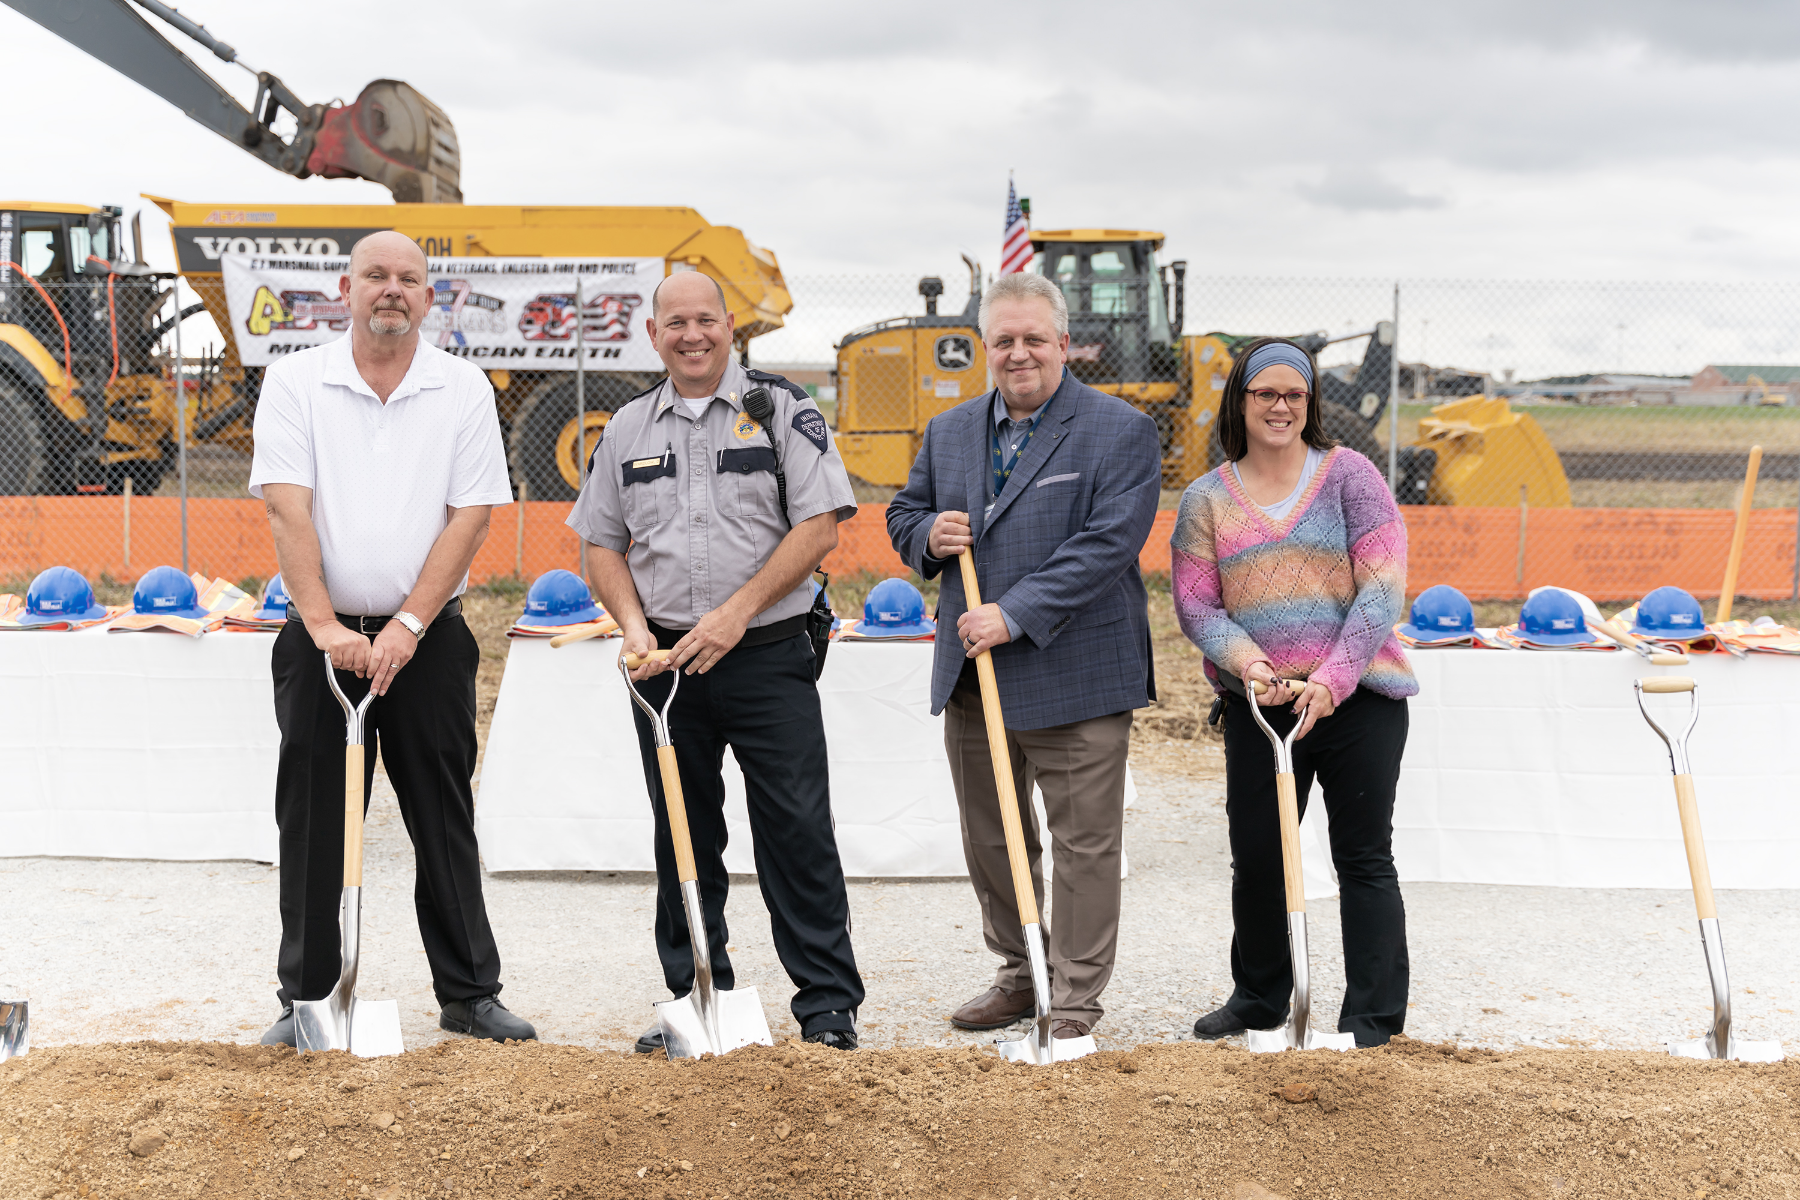 Representatives from the Indiana State Prison pose with  shovels on Thursday, Sep. 28, 2023 during the groundbreaking ceremony for the new $1.2 Billion correctional facility under construction in Westville, Indiana. SCOTT ROBERSON | Indiana Department of Correction